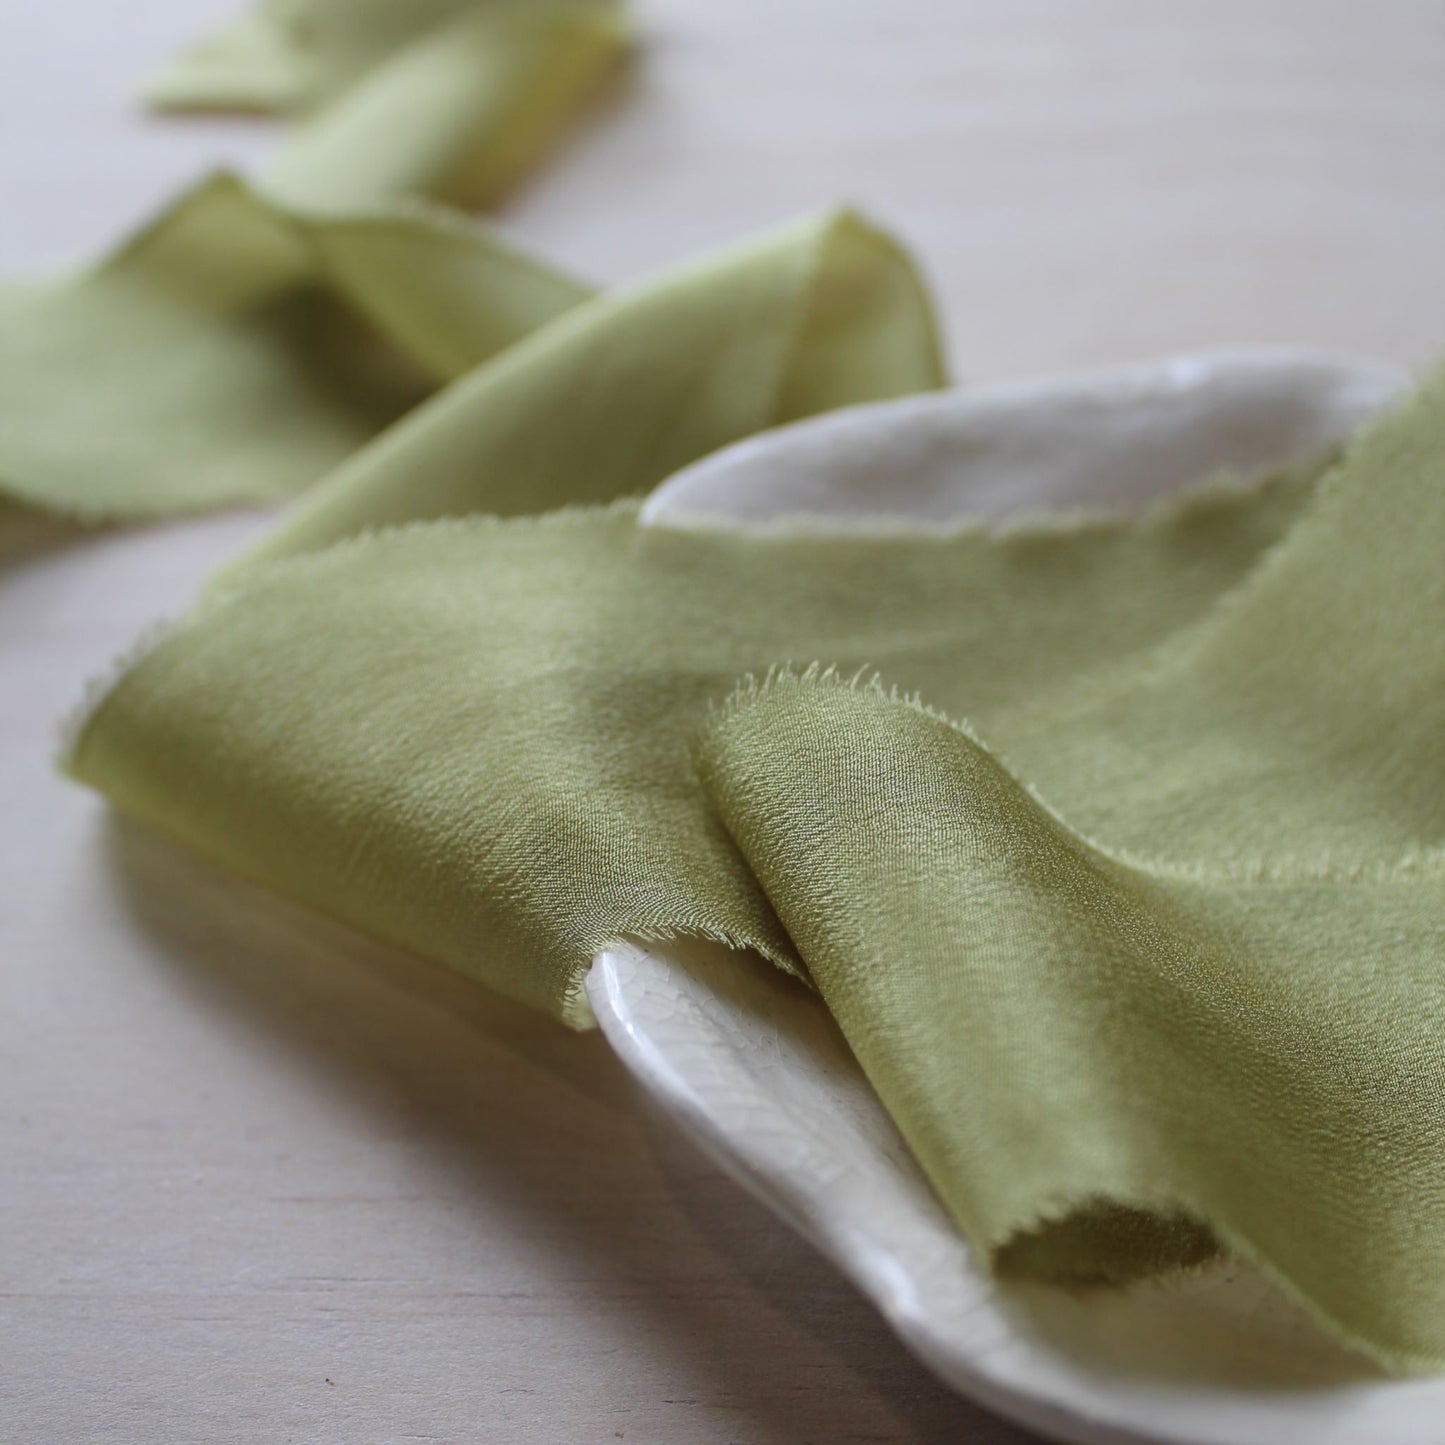 CHARTREUSE Silk Crepe de Chine Ribbon Hand Torn - LIMITED 2 yards